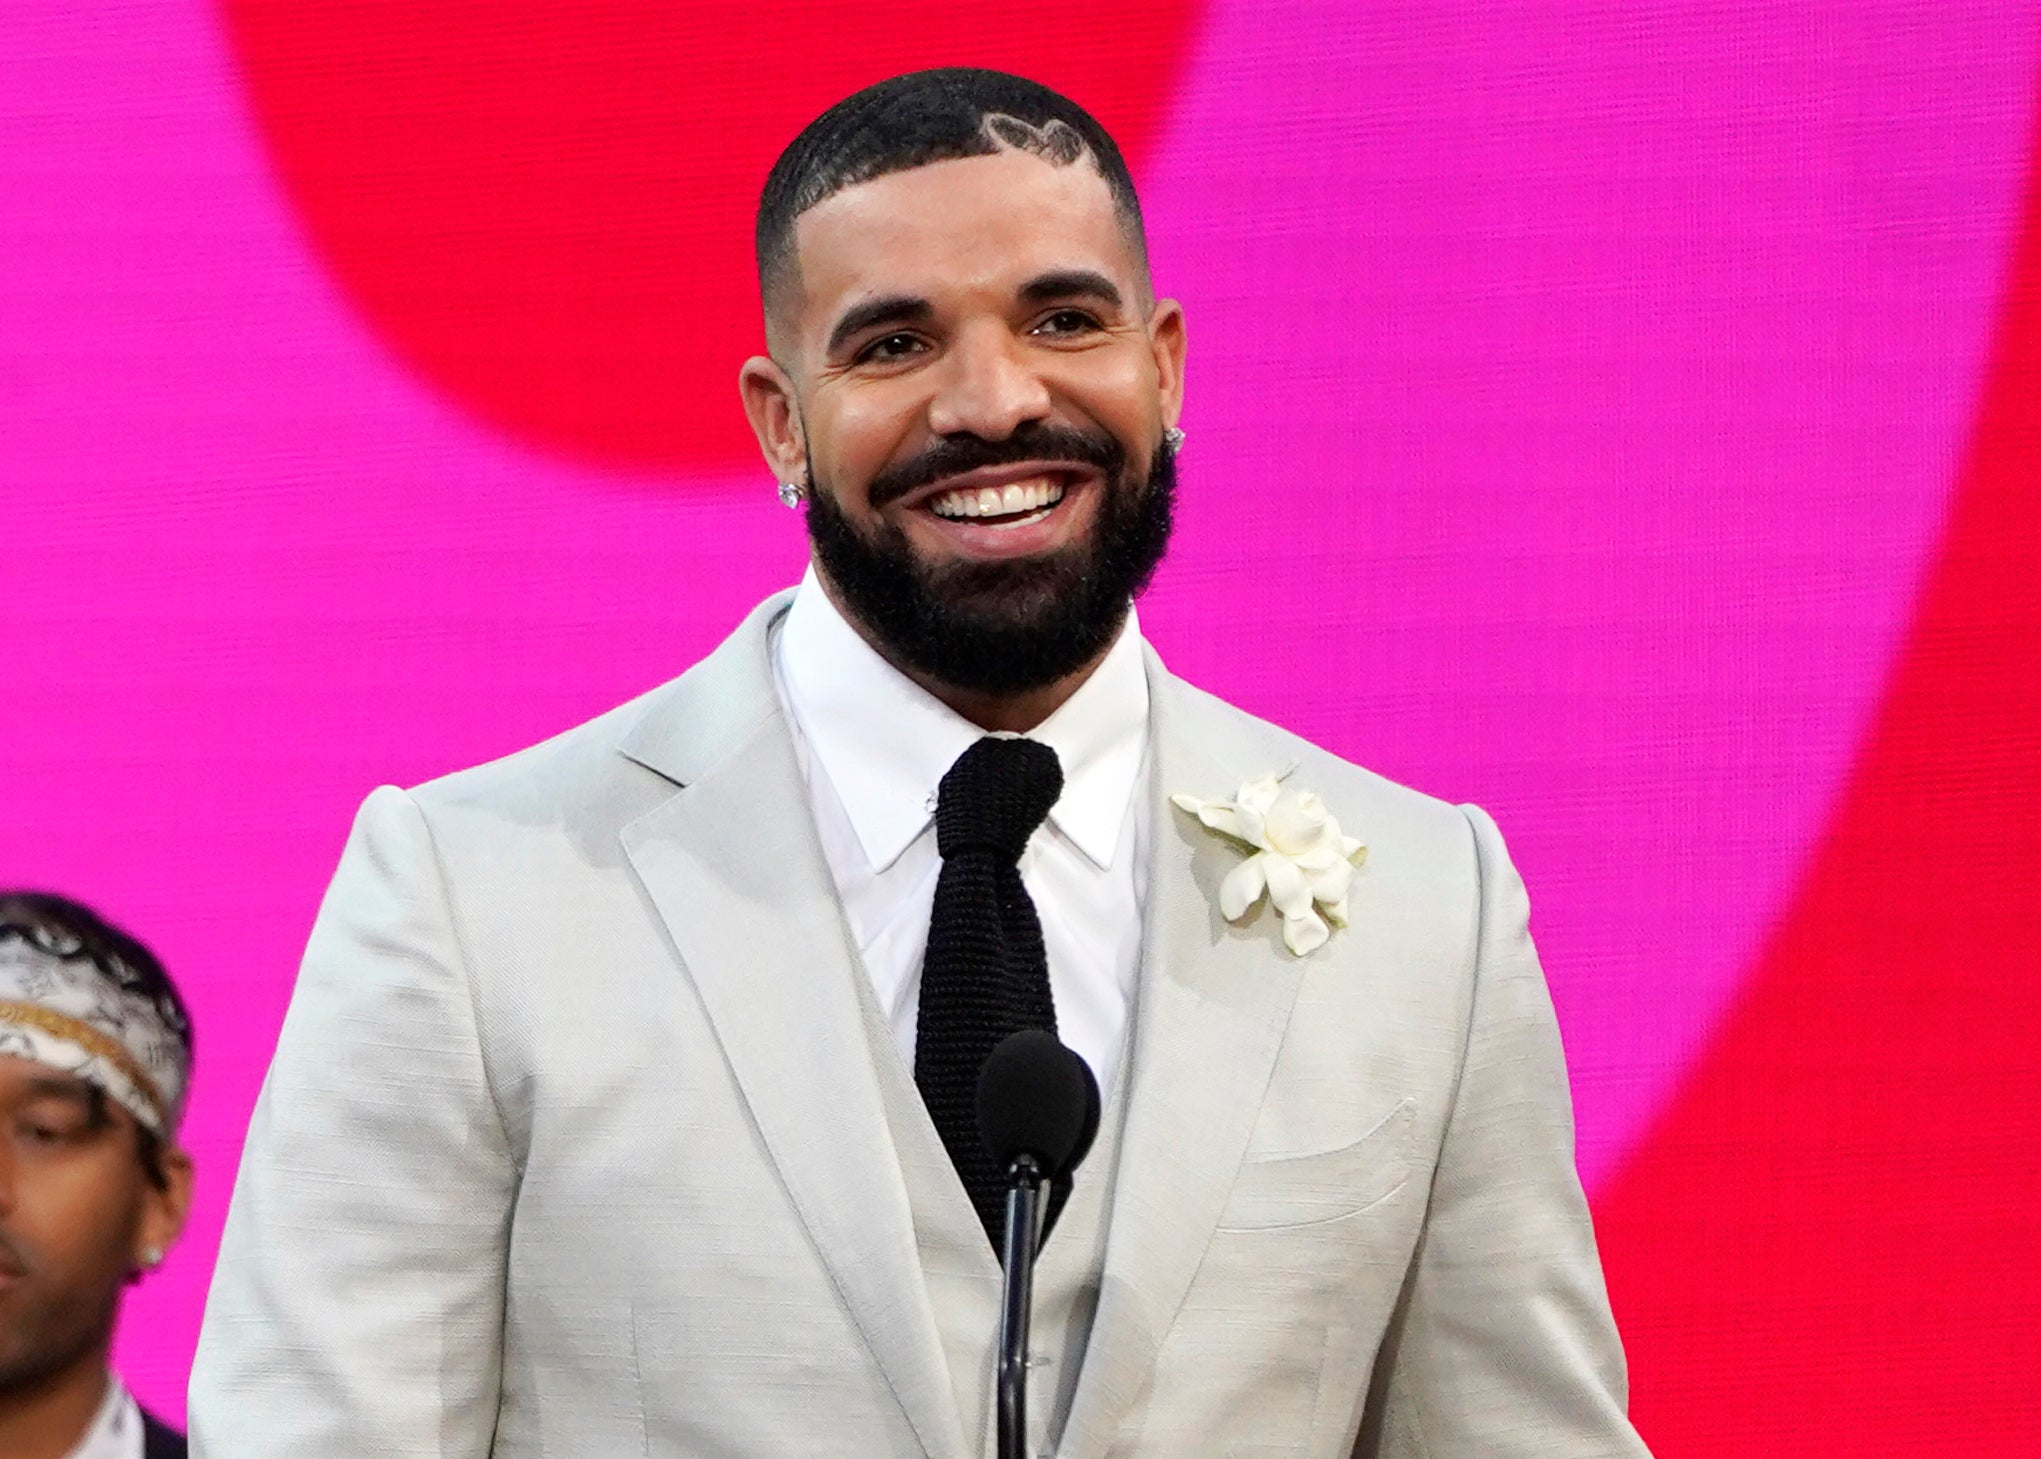 Drake is praised, held up as some kind of legend, his body commented on as a result – but he’s a victim, and should be treated with the sympathy and gentleness that he deserves